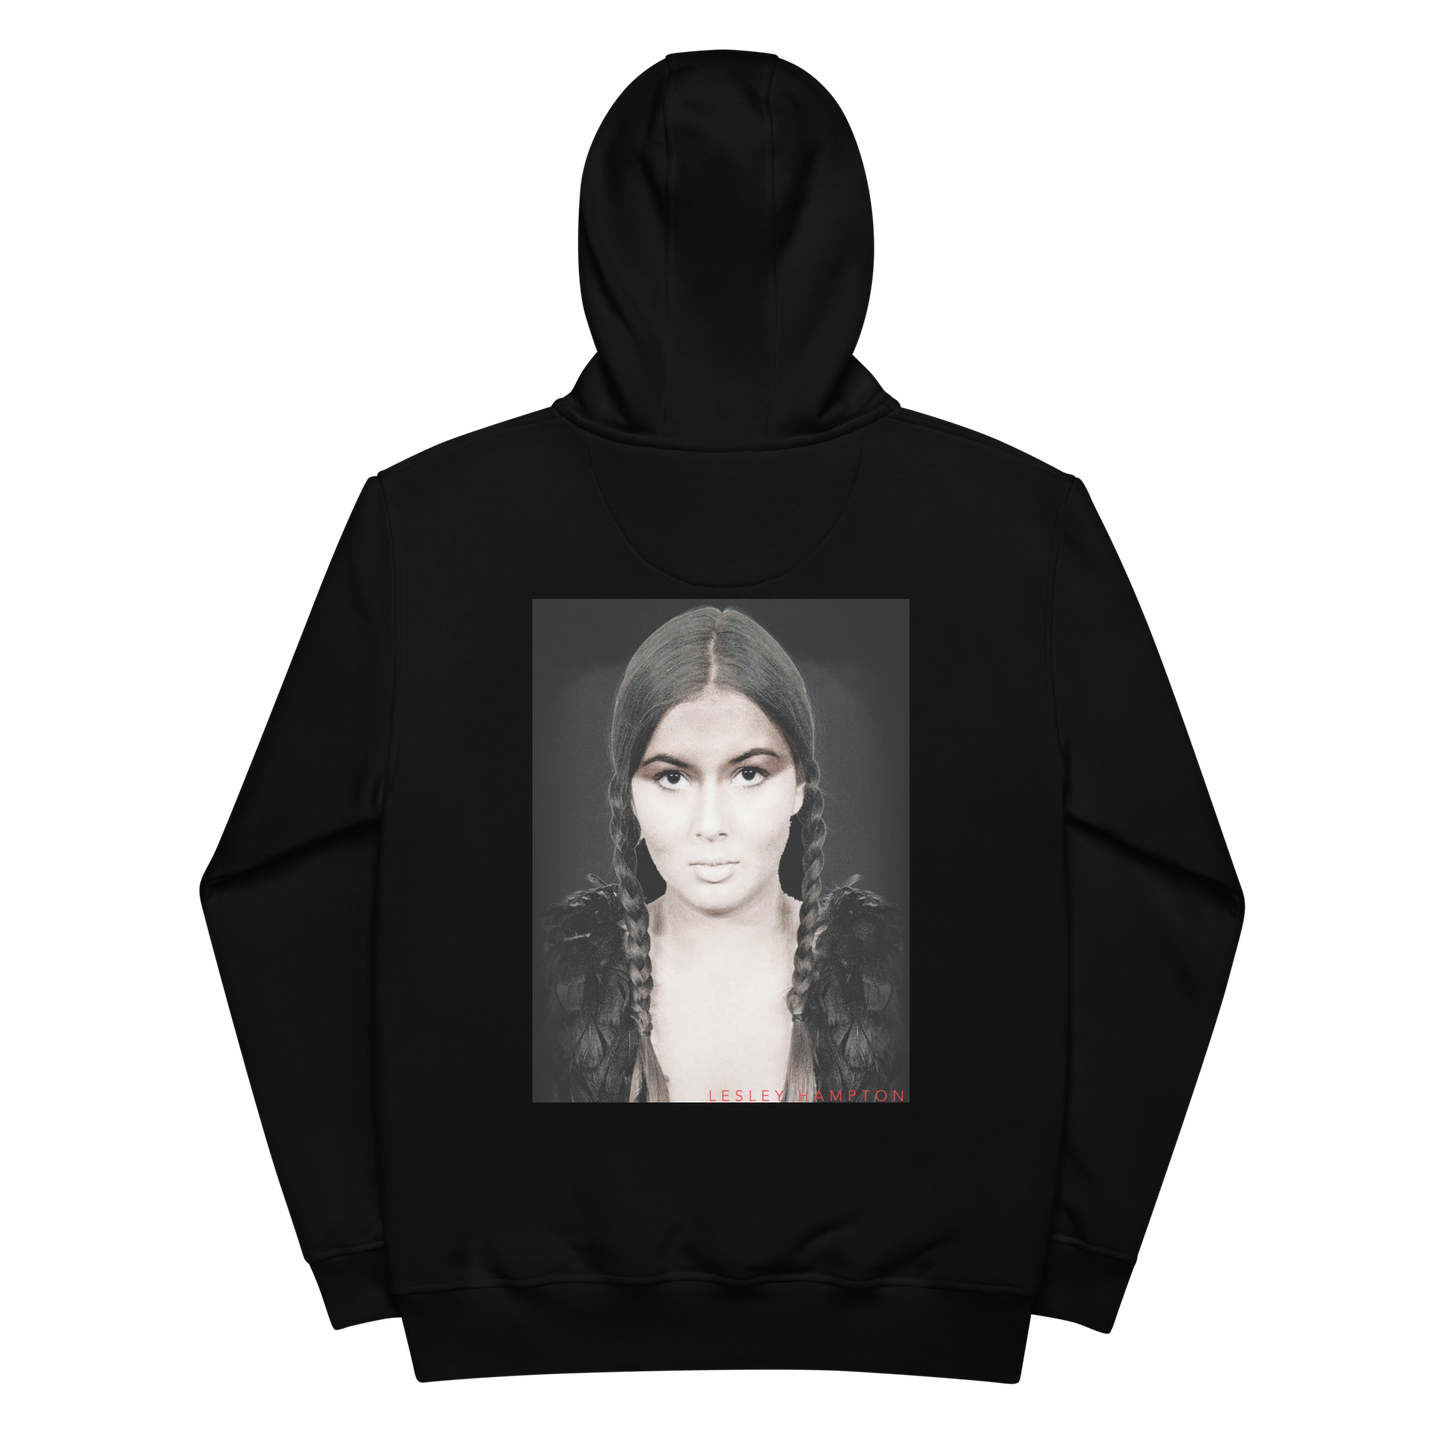 LH Graphic Hoodie